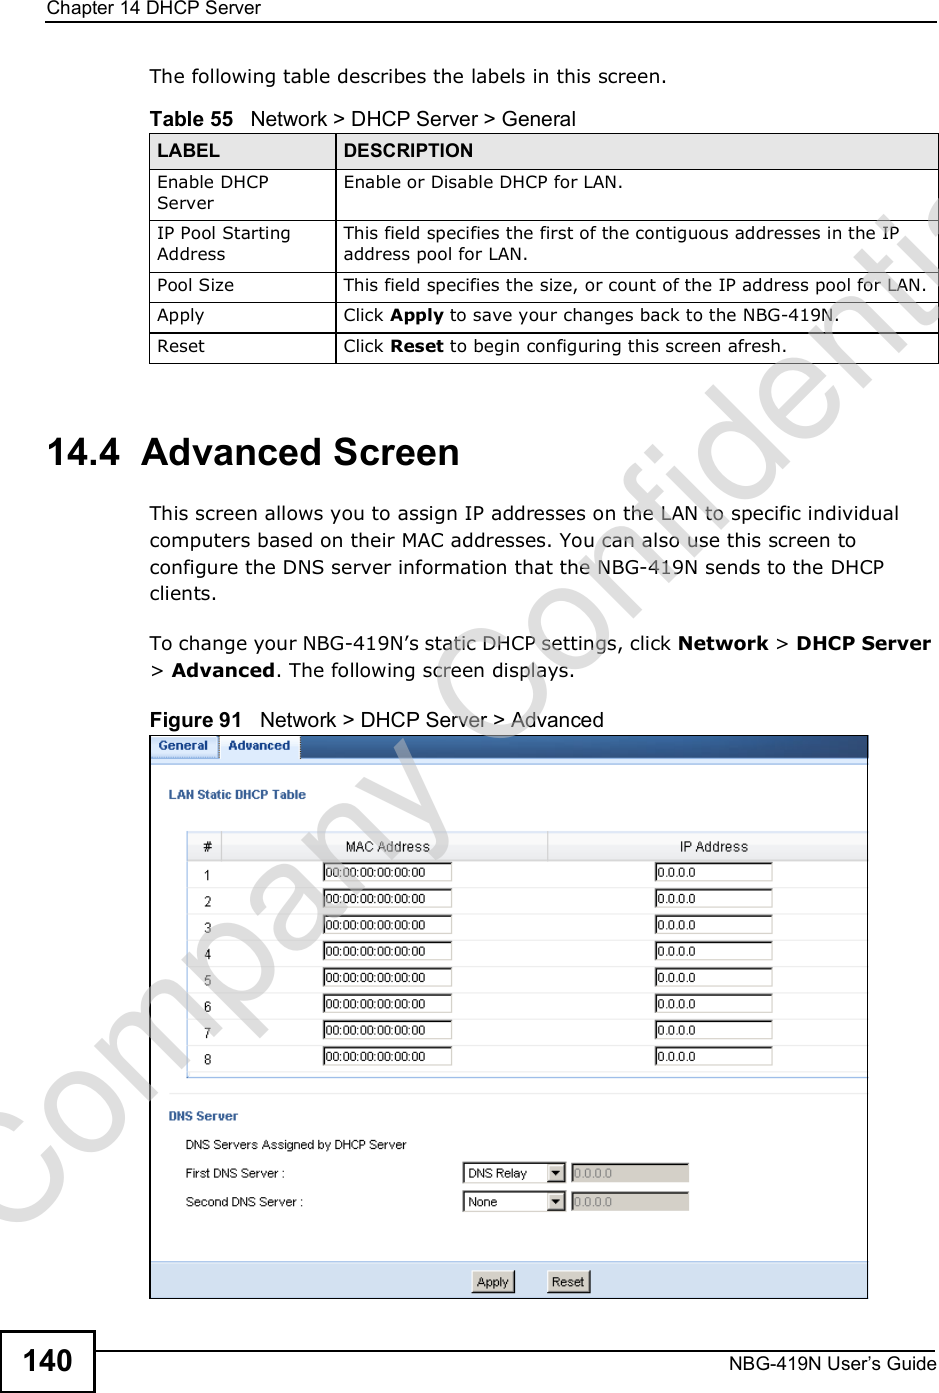 Chapter 14DHCP ServerNBG-419N User s Guide140The following table describes the labels in this screen.14.4  Advanced Screen    This screen allows you to assign IP addresses on the LAN to specific individual computers based on their MAC addresses. You can also use this screen to configure the DNS server information that the NBG-419N sends to the DHCP clients.To change your NBG-419N!s static DHCP settings, click Network &gt; DHCP Server &gt; Advanced. The following screen displays.Figure 91   Network &gt; DHCP Server &gt; Advanced Table 55   Network &gt; DHCP Server &gt; General LABEL DESCRIPTIONEnable DHCP ServerEnable or Disable DHCP for LAN.IP Pool Starting AddressThis field specifies the first of the contiguous addresses in the IP address pool for LAN.Pool Size This field specifies the size, or count of the IP address pool for LAN.Apply Click Apply to save your changes back to the NBG-419N.Reset Click Reset to begin configuring this screen afresh.Company Confidential